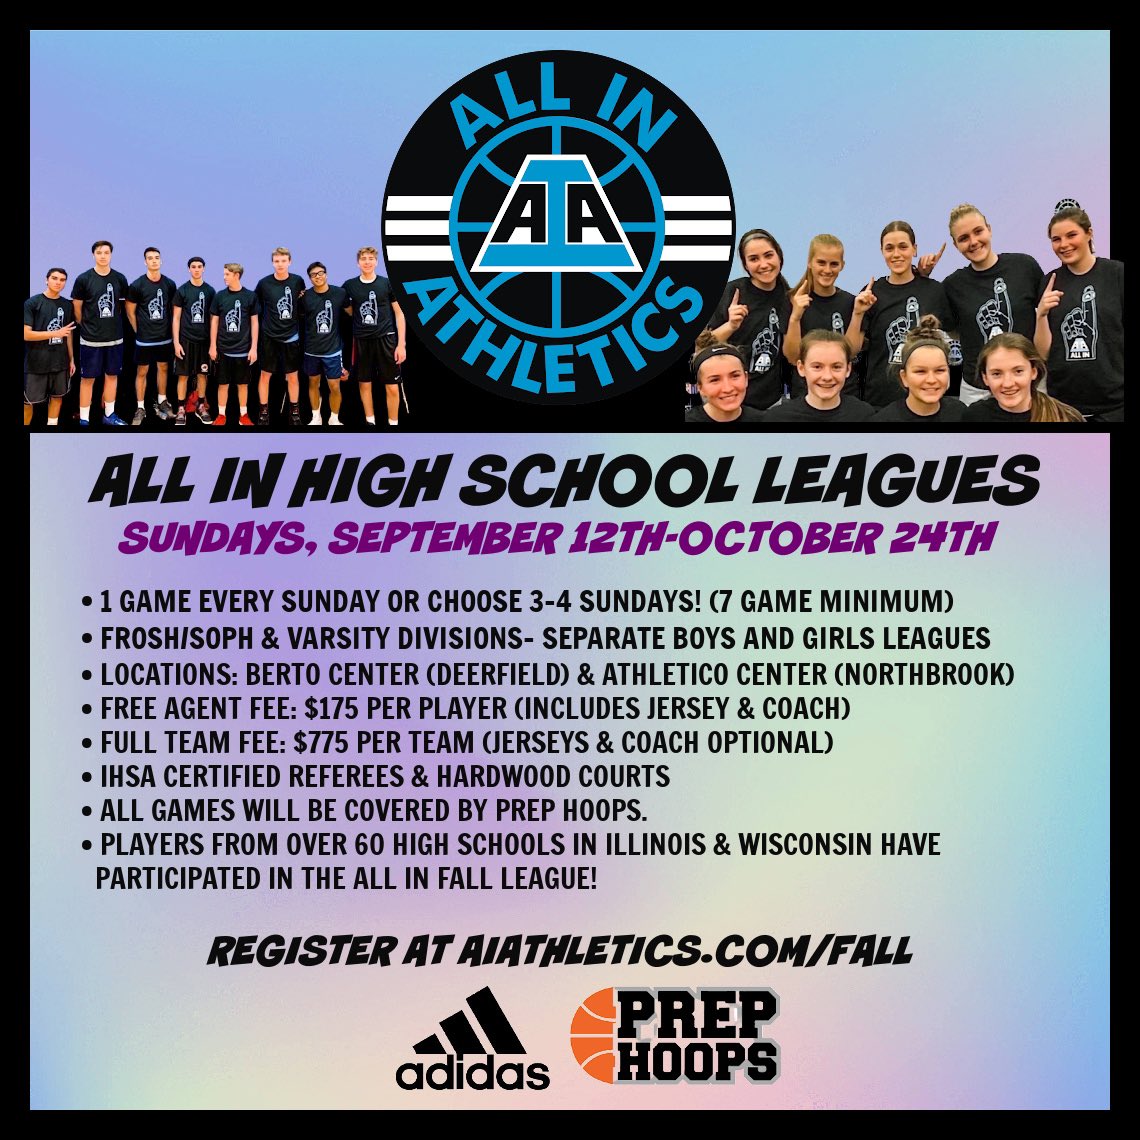 ALL IN FALL PROGRAMS BEGIN SOON! 🏀 Travel Teams (2nd-12th) 🏀 Sunday High School Leagues 🏀 Sunday 3v3 Leagues (4th-8th) 🏀 Camps & Training 🔍 Learn more and register today at aiathletics.com/fall